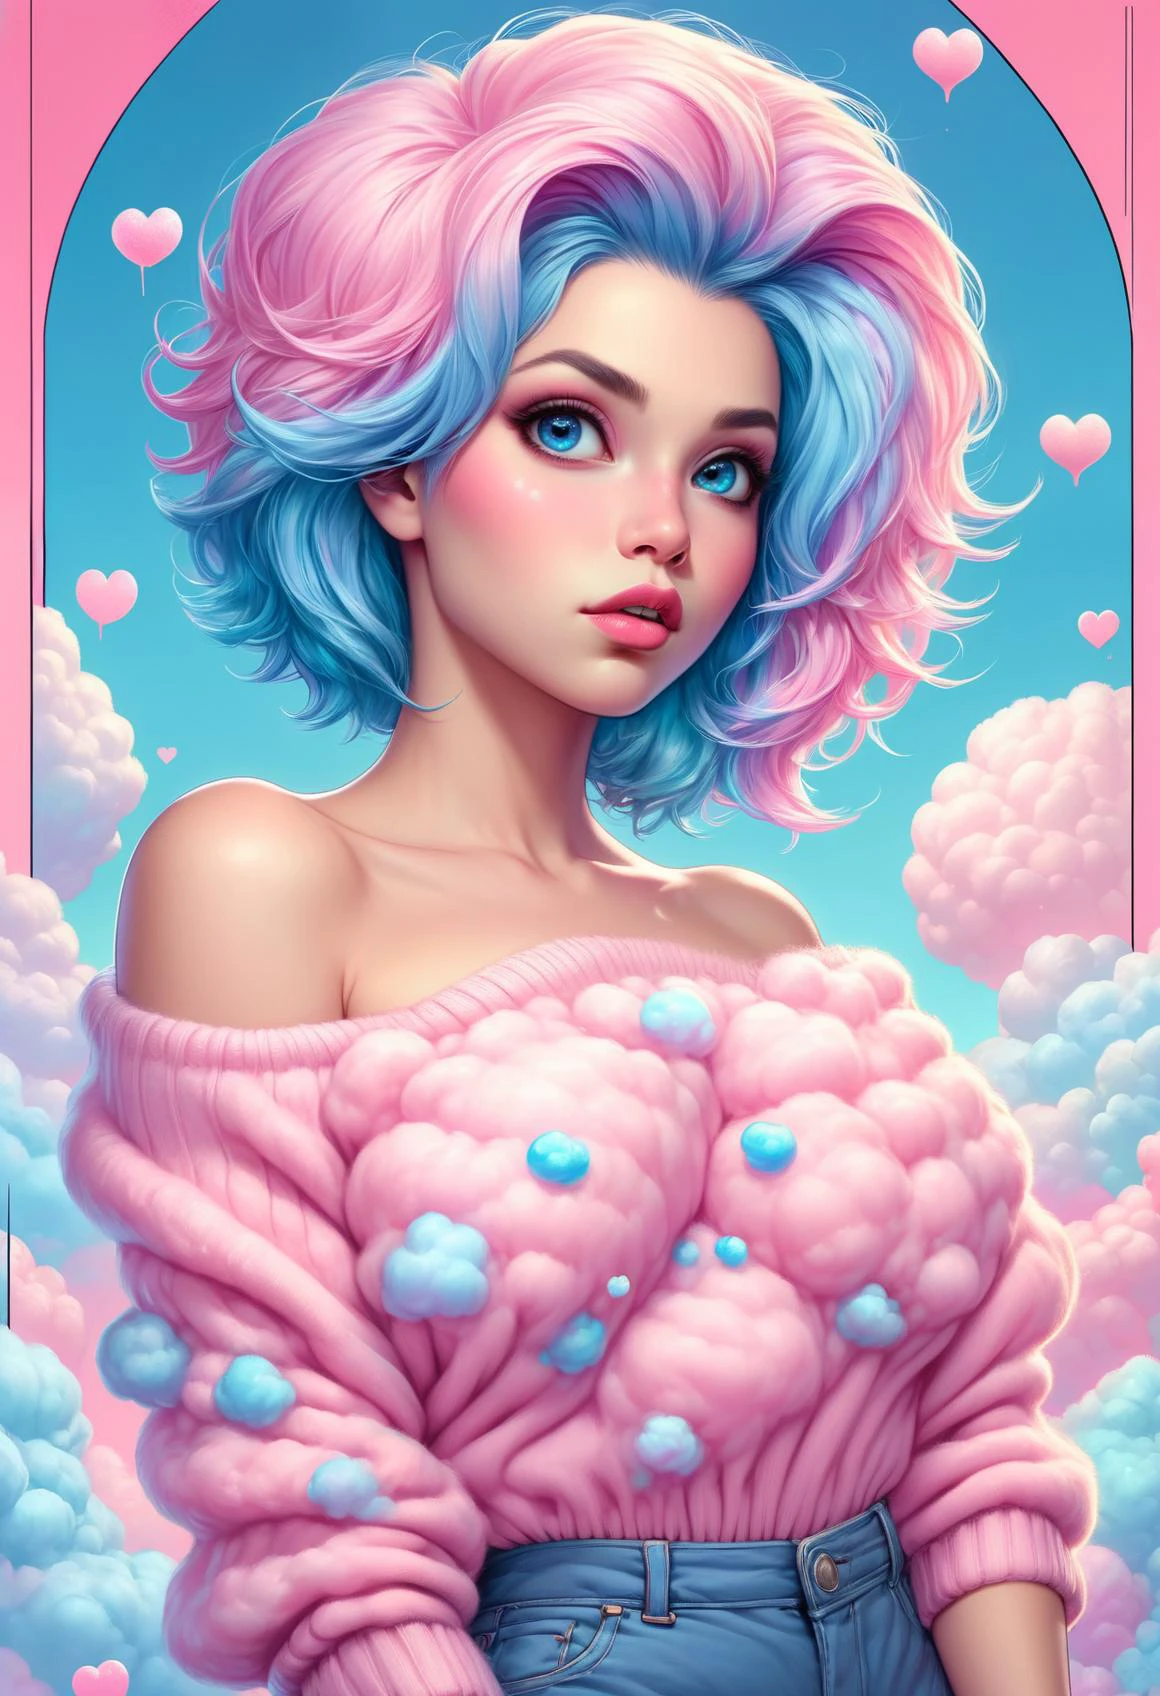 cottoncandy, character concept art of a beautiful woman leaning over, pink cotton candy sweater falling off her shoulder, valentines day,  cleavage, extremely sexy, seductive, long iridescent pink and blue hair, luscious lips, comic book art, rough colored sketch
, colorful, elaborate wonderful background,